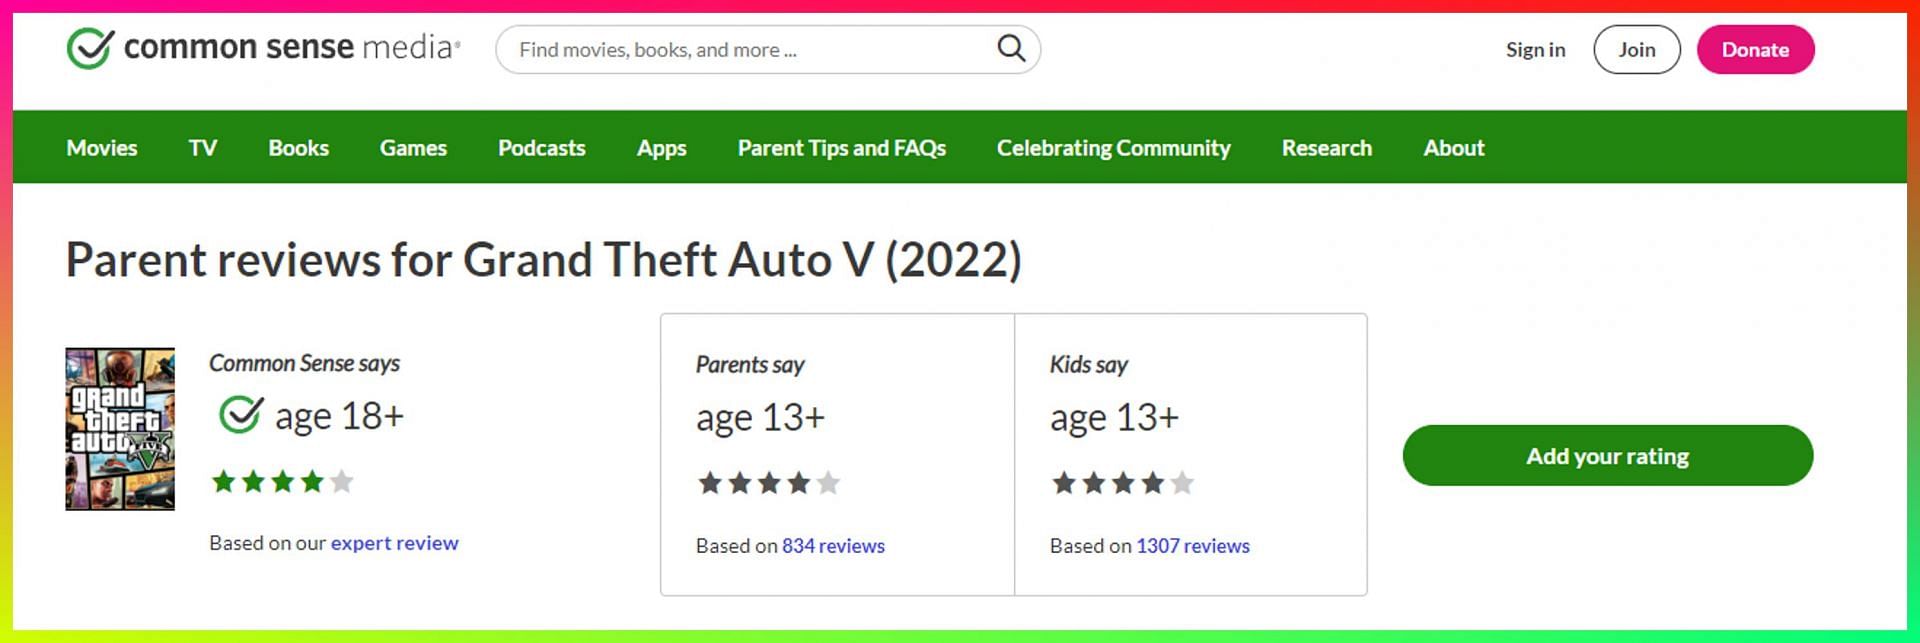 What is the best age for GTA?